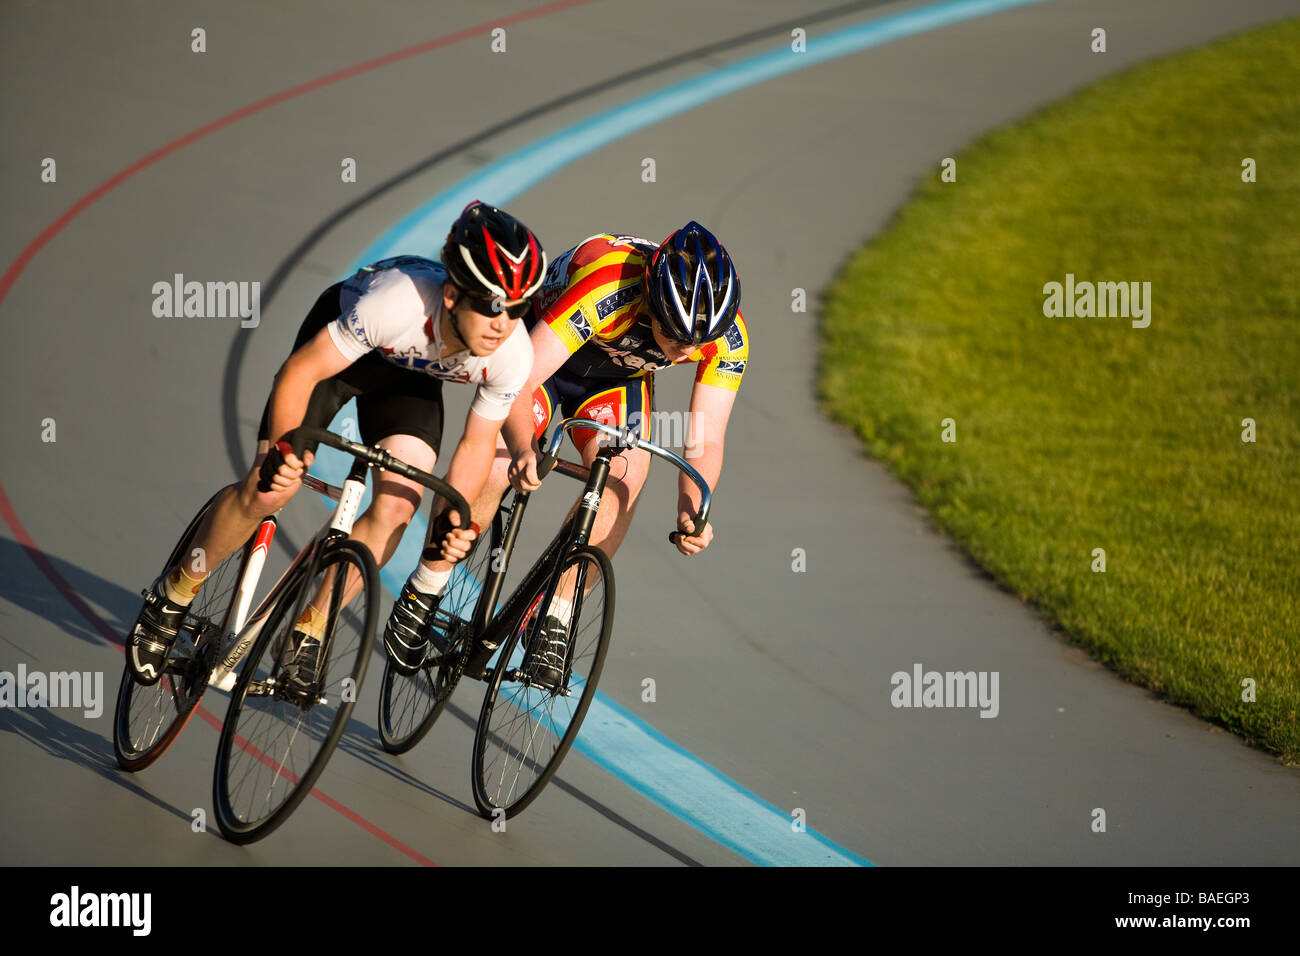 ILLINOIS Northbrook Two young male bicyclists in bicycle race at velodrome track Stock Photo